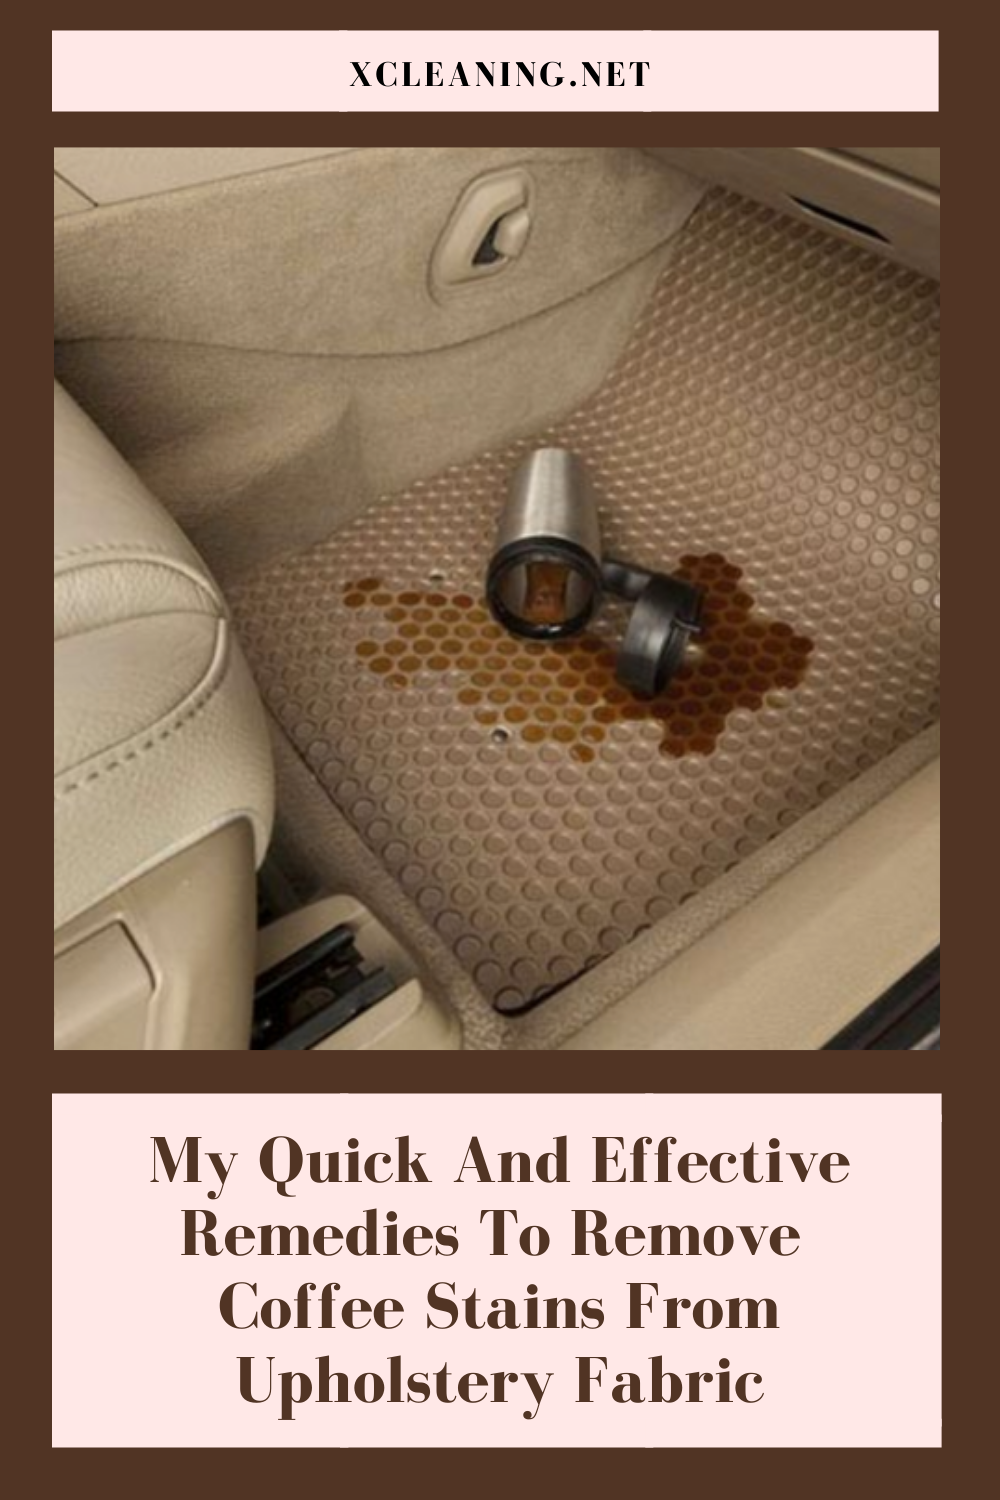 remove stains fabric coffee upholstery remedies effective quick stain xcleaning cleaning